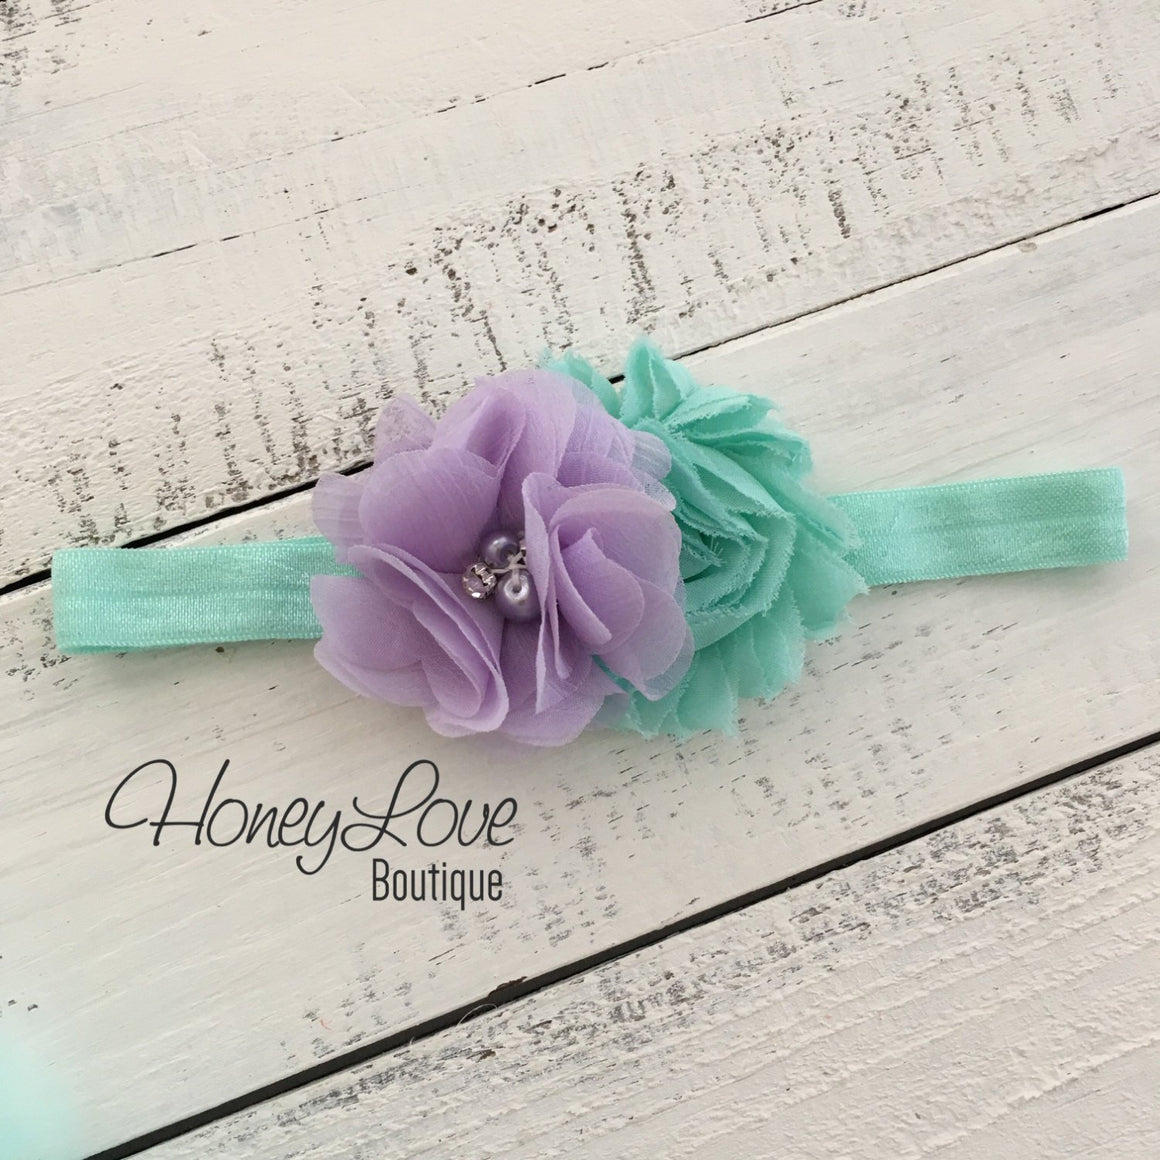 PERSONALIZED Name with Arrow - Gold Glitter, Mint/Aqua and Lavender Purple - HoneyLoveBoutique